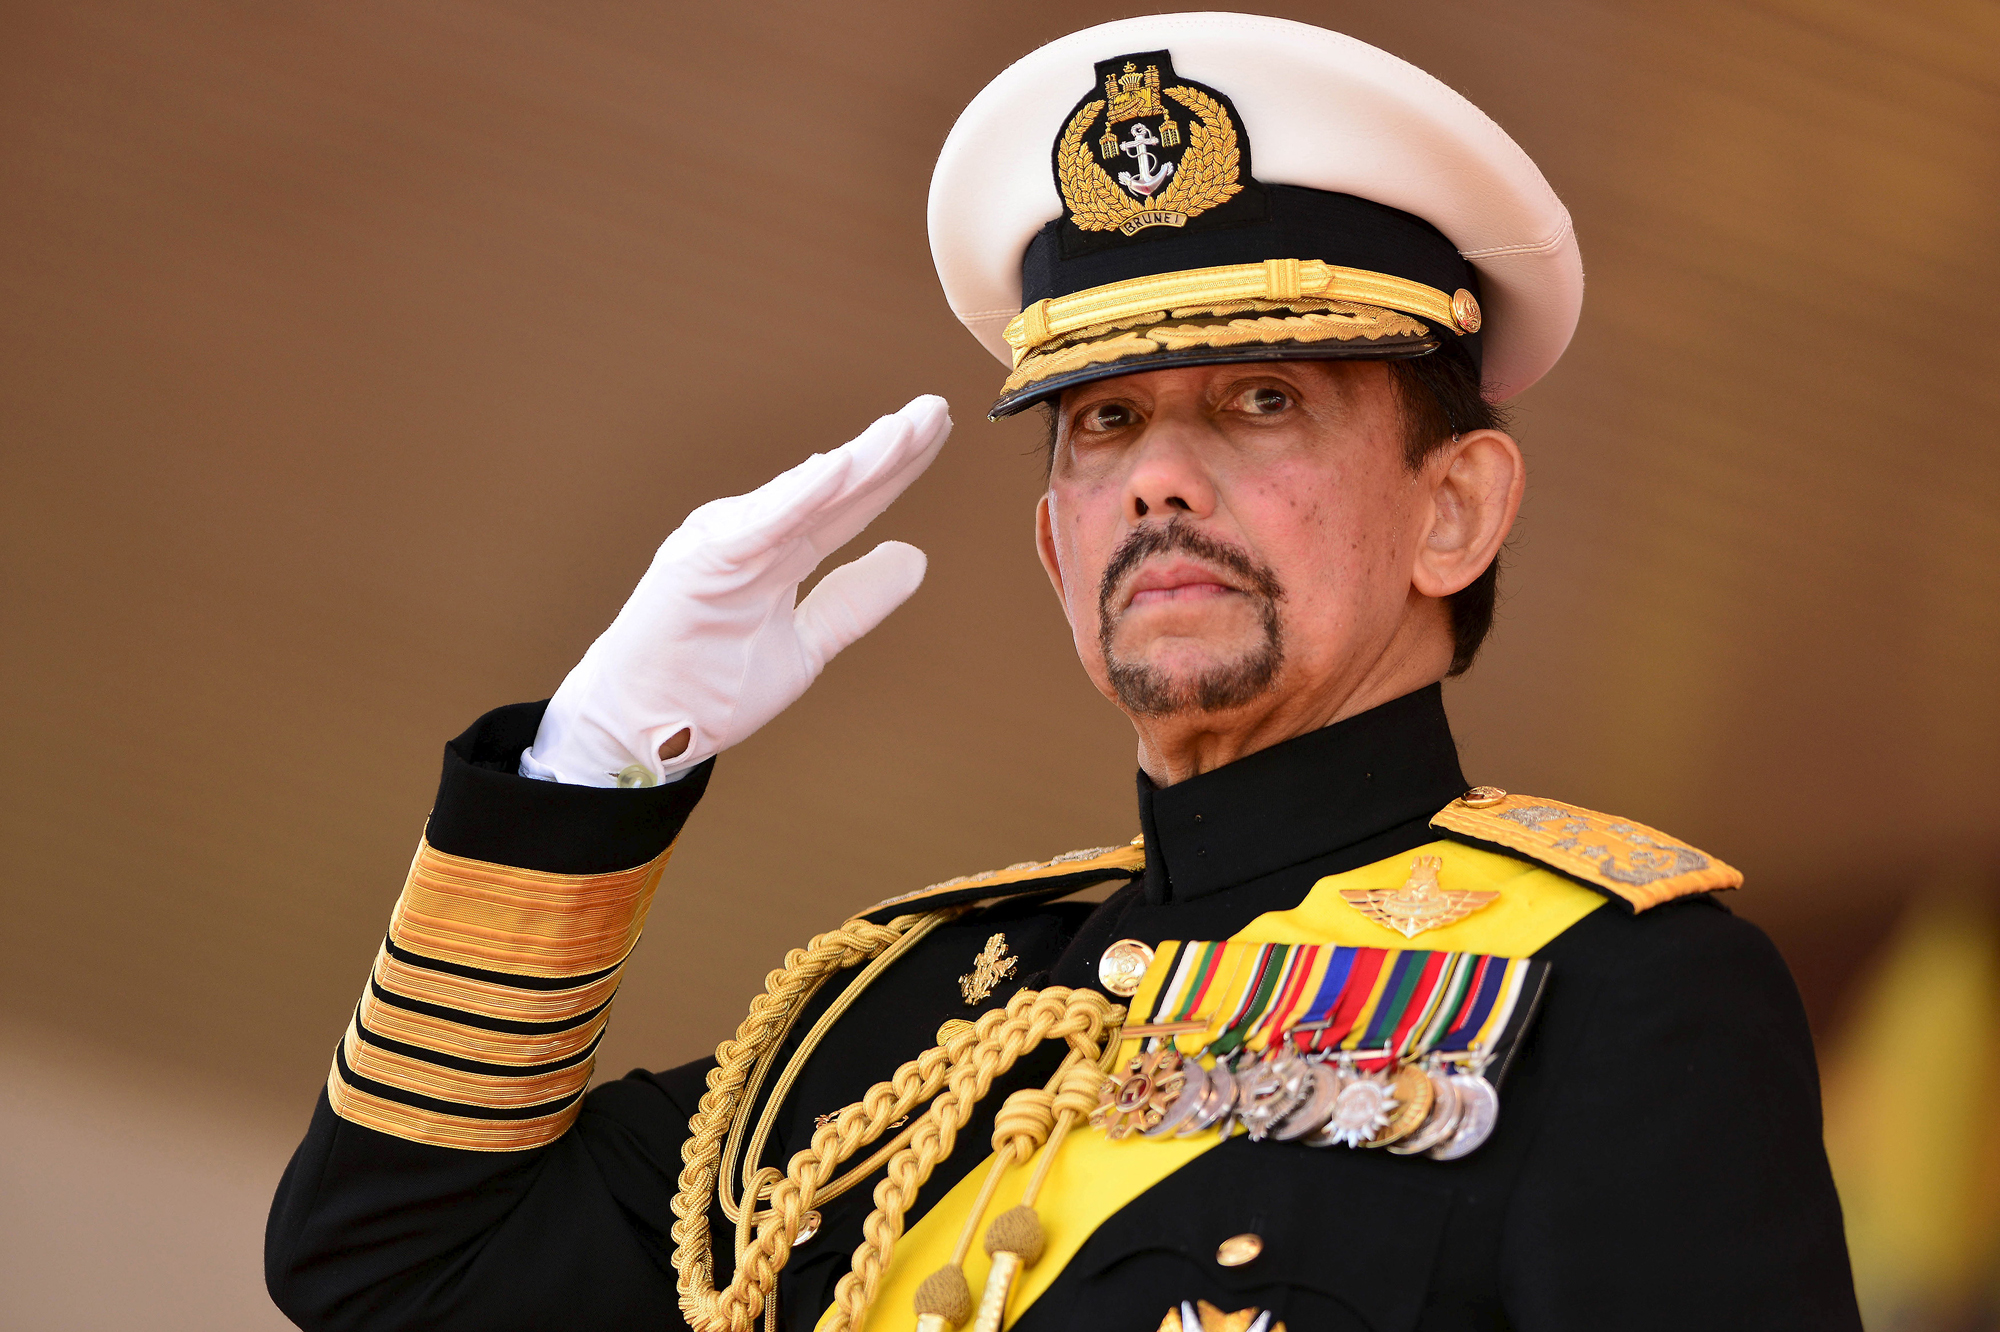 Brunei's Sultan Hassanal Bolkiah salutes during his 69th birthday celebrations in Bandar Seri Begawan, Brunei, August 15, 2015. Brunei's Sultan Hassanal Bolkiah was born on July 15, 1946. The official birthday celebrations were postponed due to the Sultan's birthday falling in the month of Ramadan, according to local media. REUTERS/Ahim Rani - RTX1OCNE